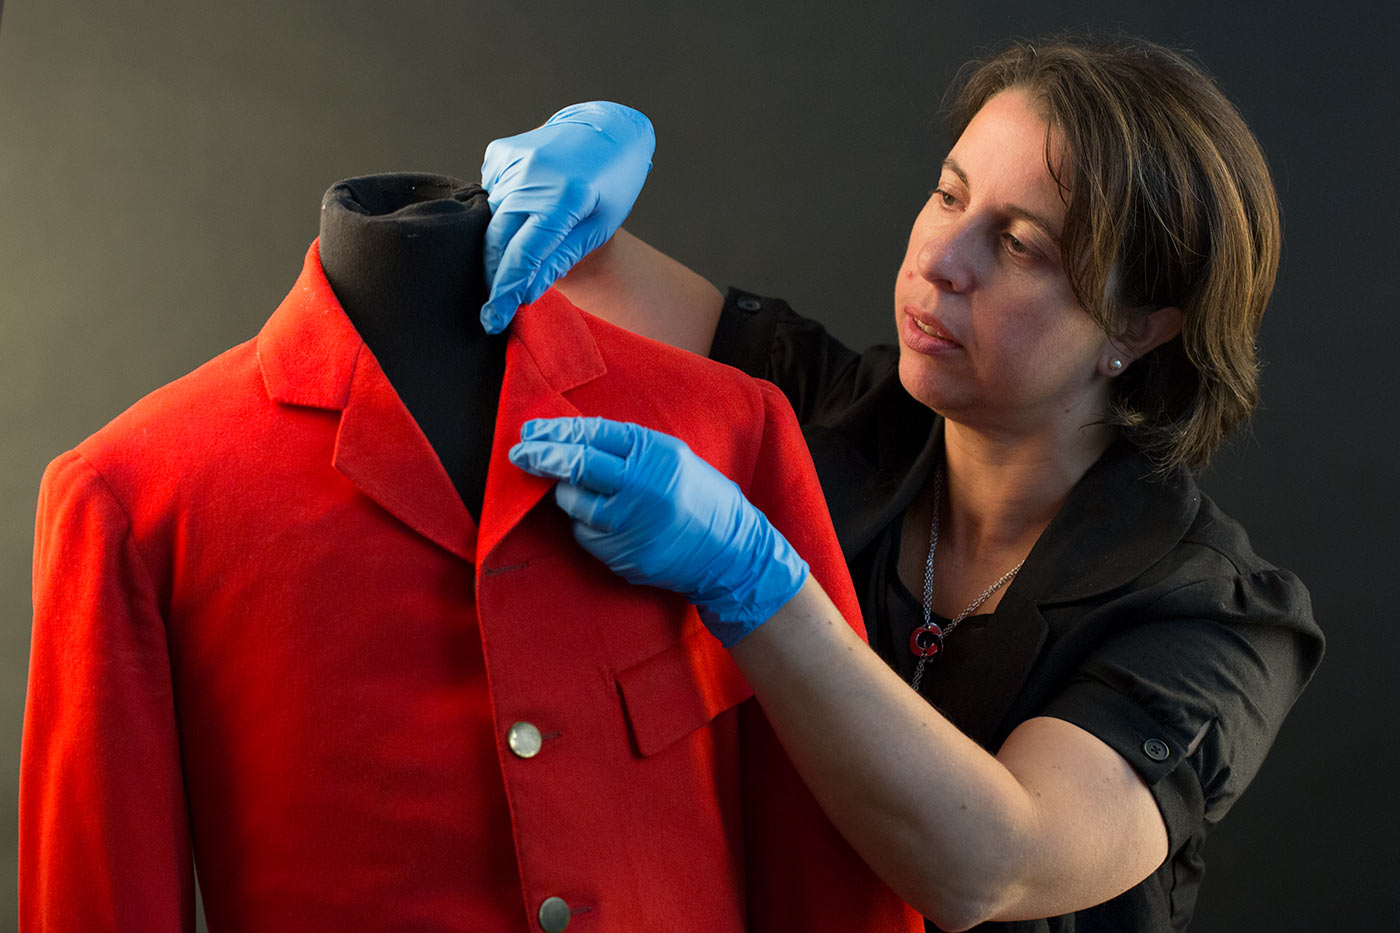 A woman is examining a red coat. - click to view larger image